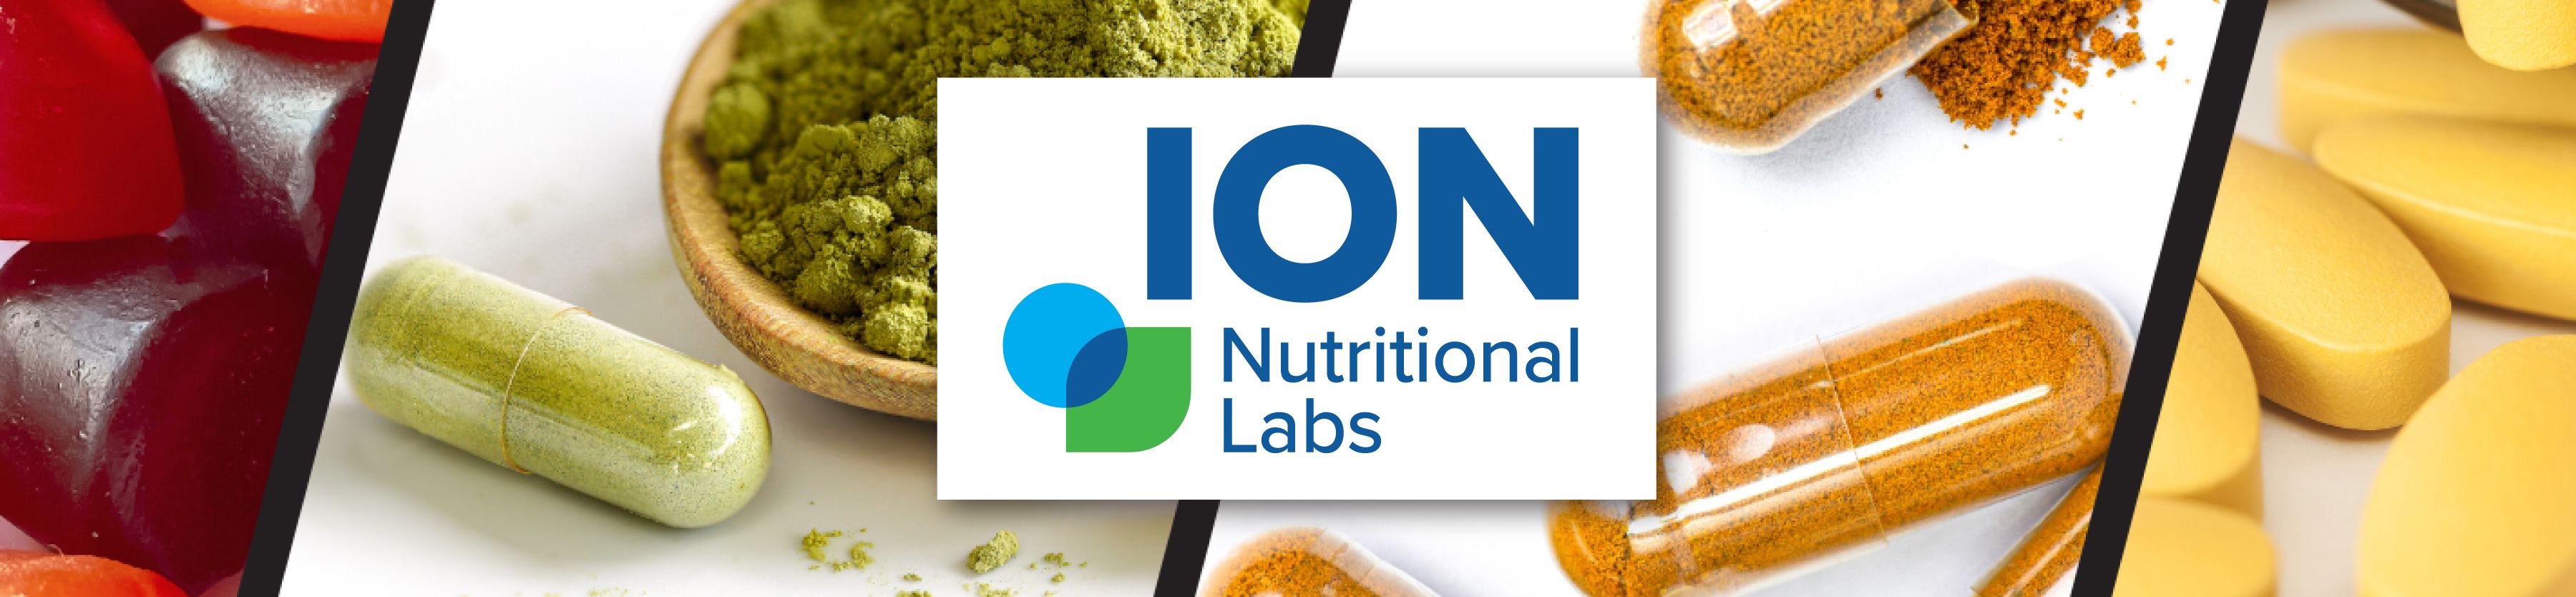 Introducing Ion Nutritional Labs 